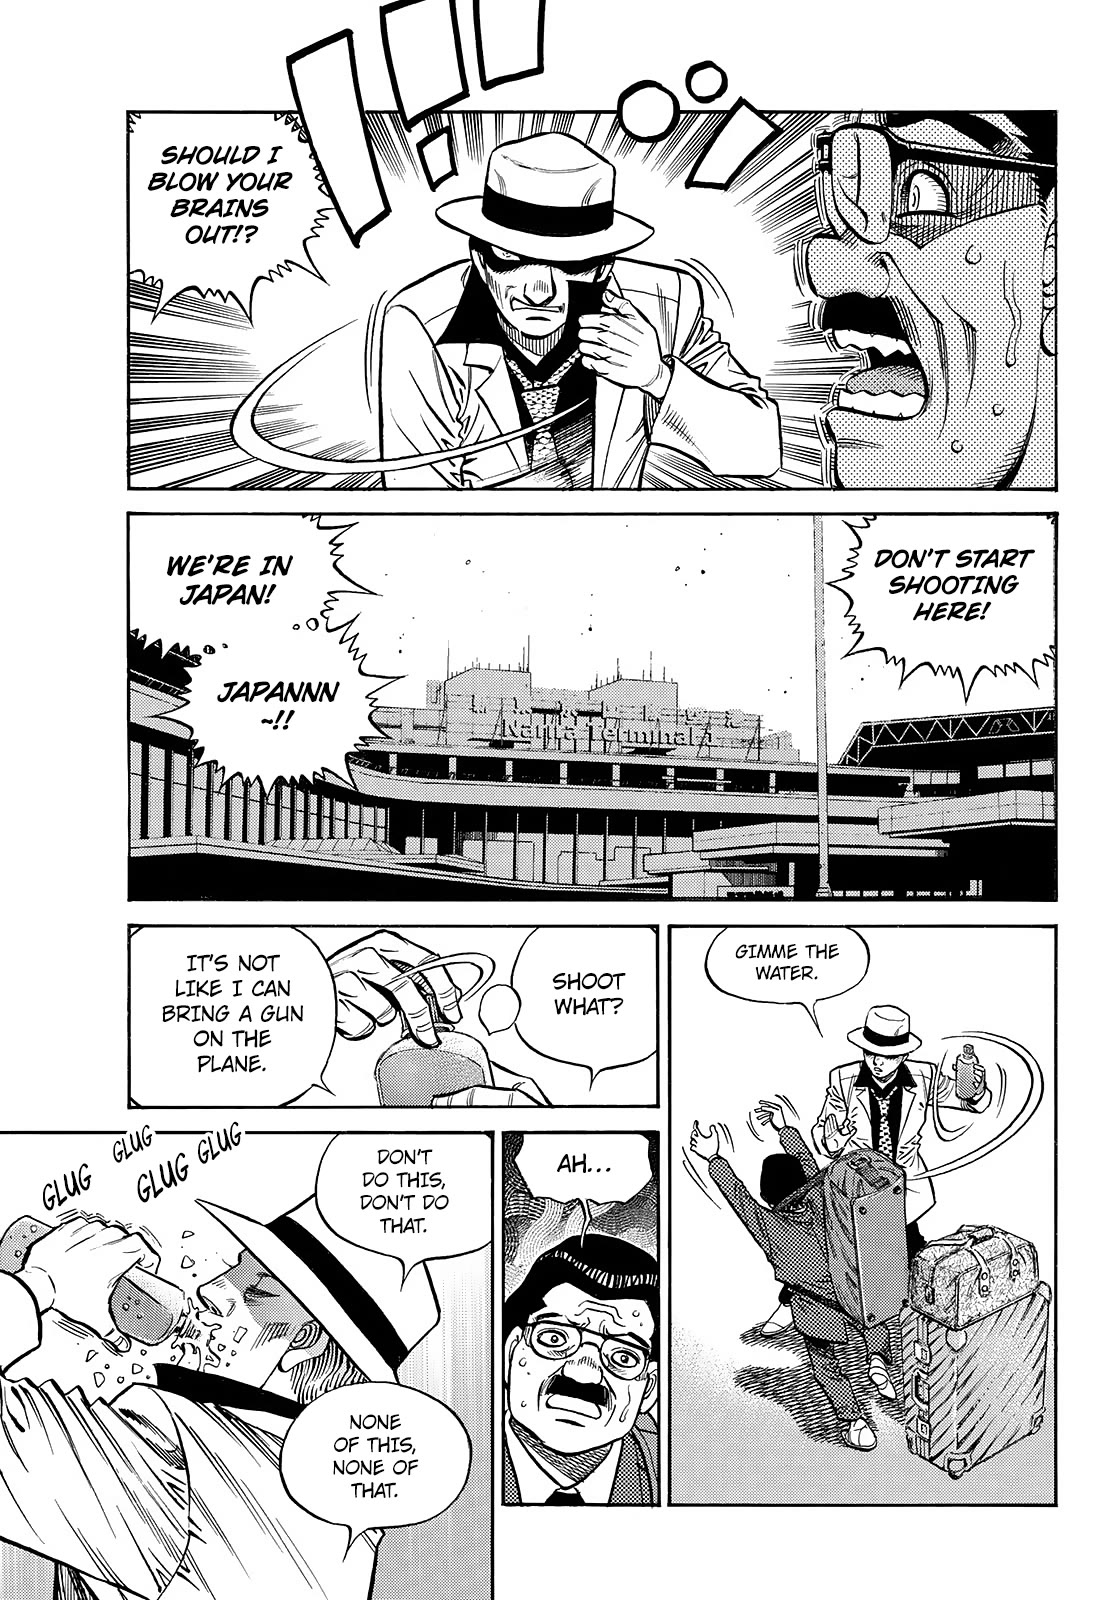 Hajime no Ippo, Chapter 1446 Round 1446 Rosario Arrives in Japan image 08